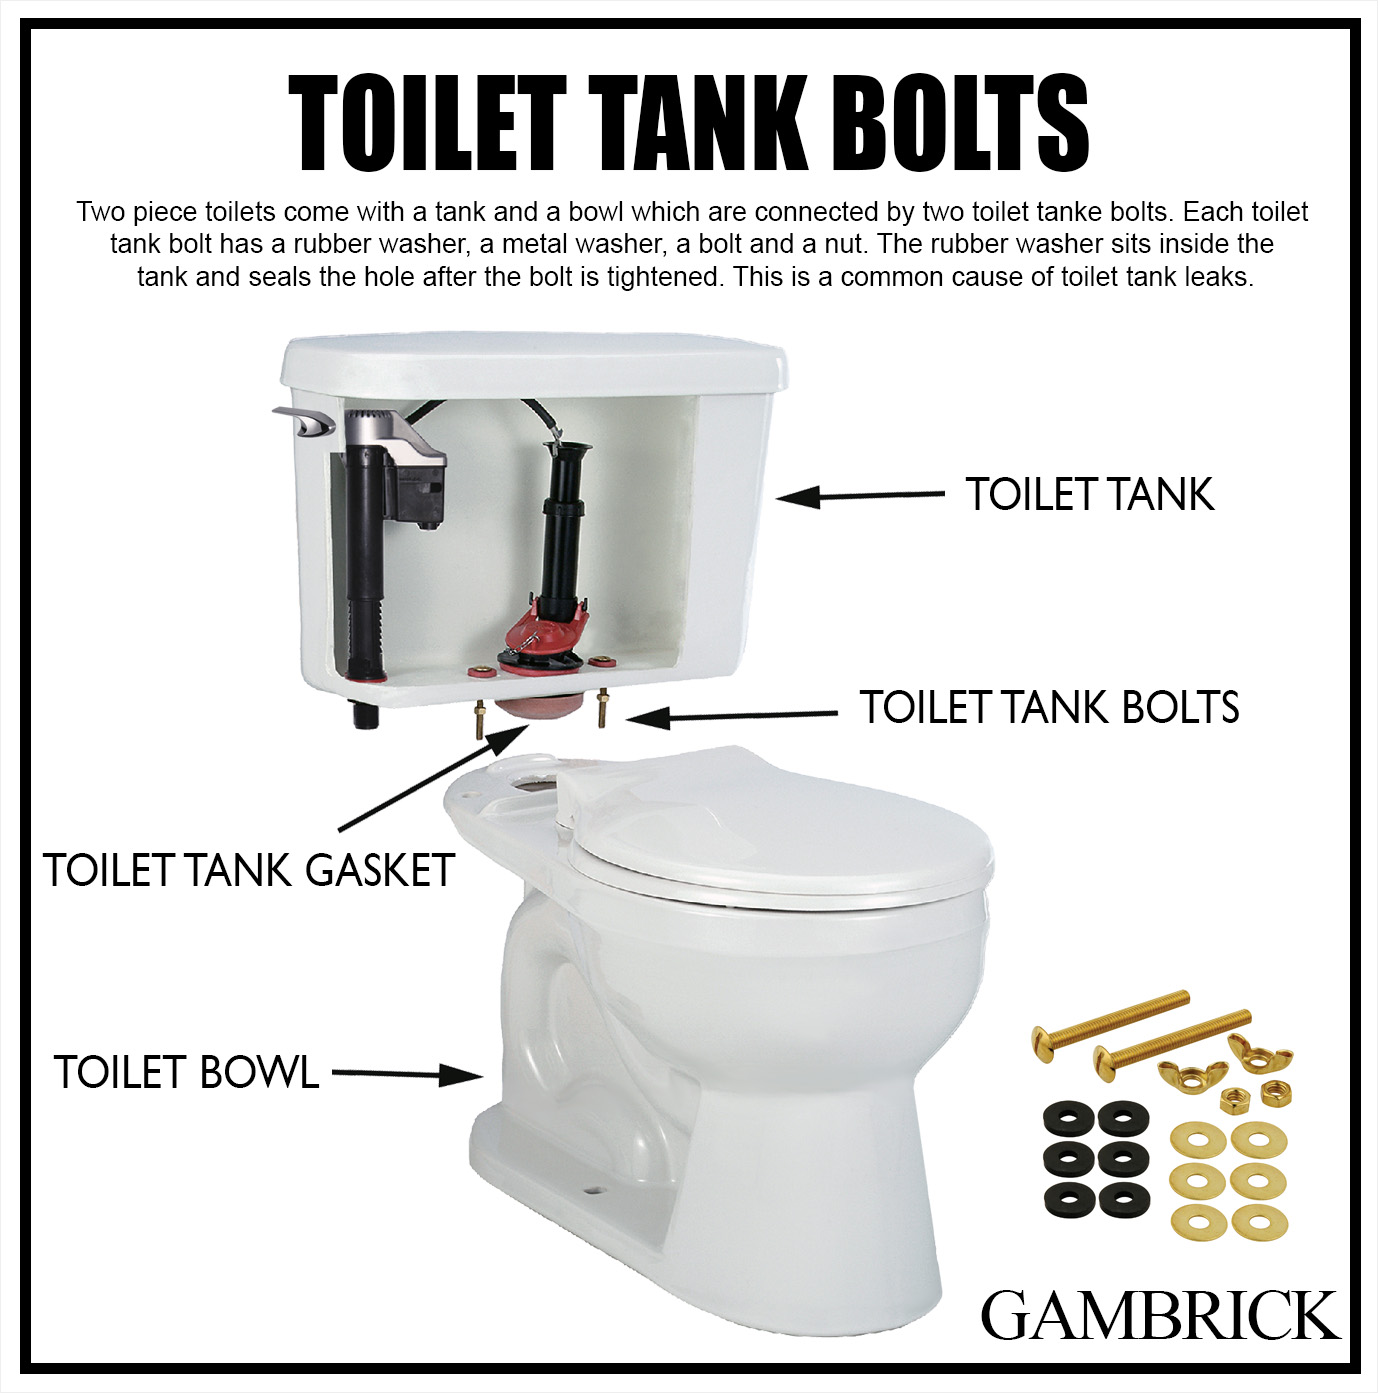 toilet tank bolts infographic chart 1.0